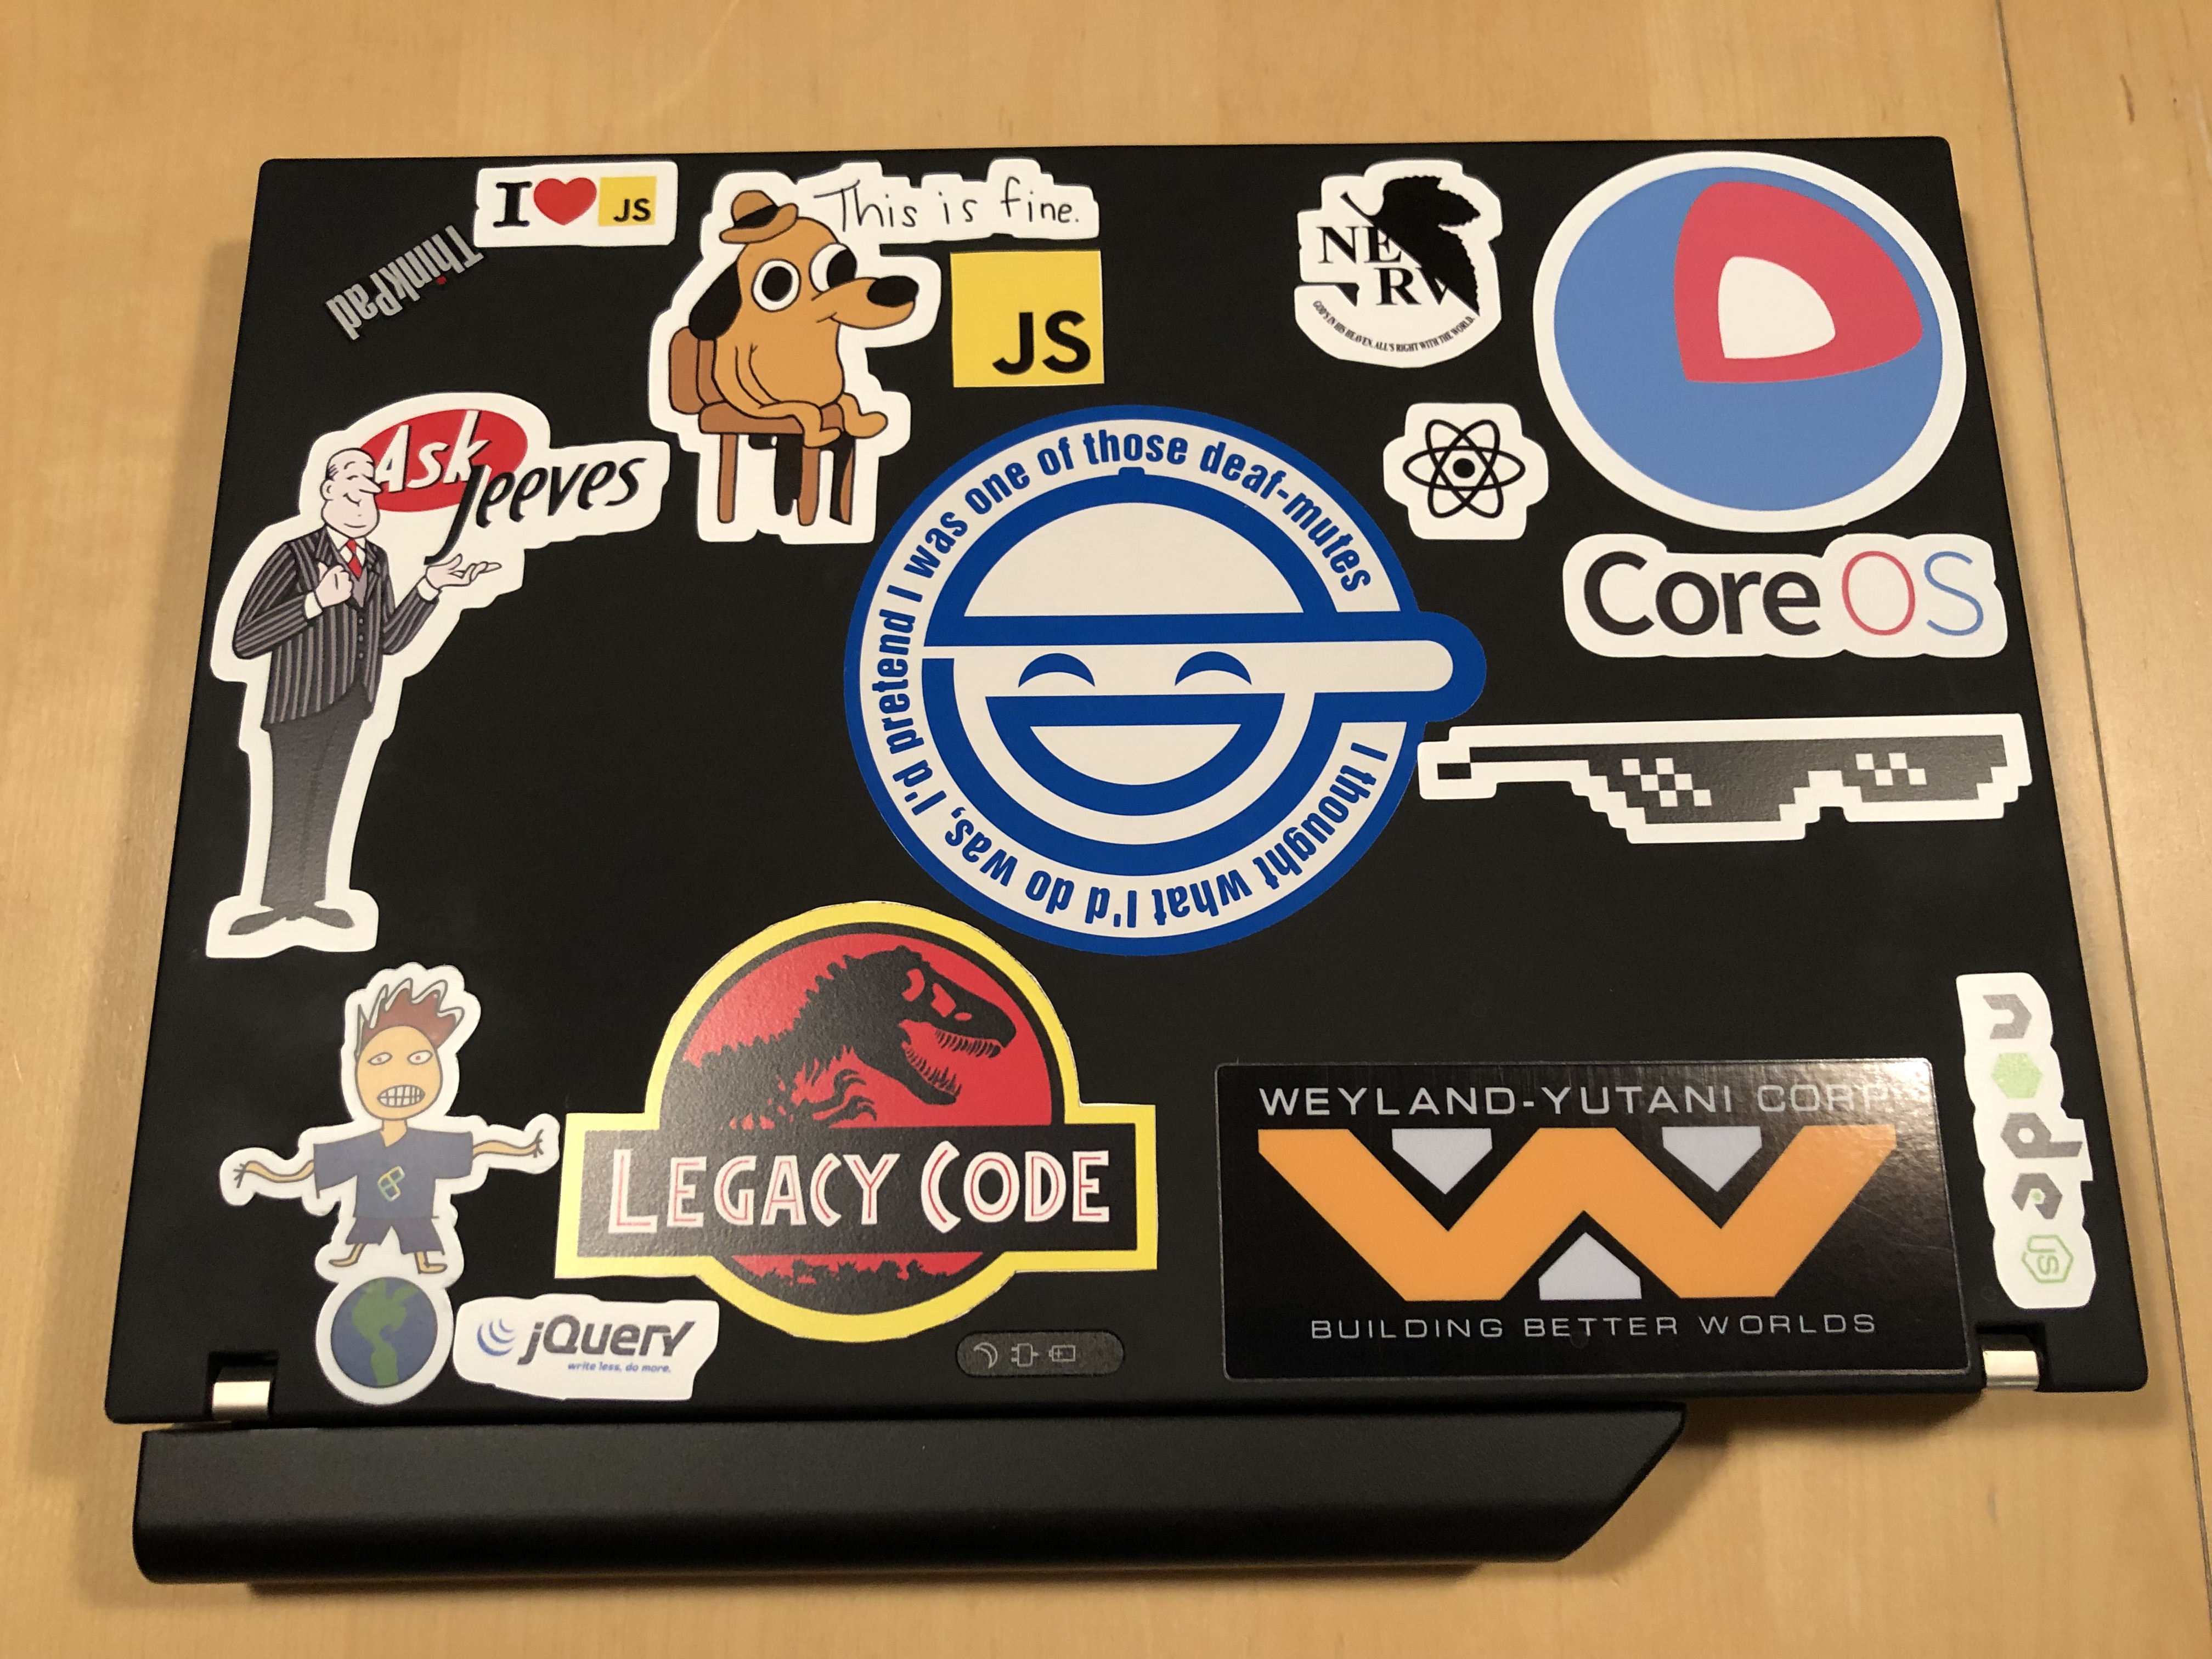 I tend to go overboard with stickers.